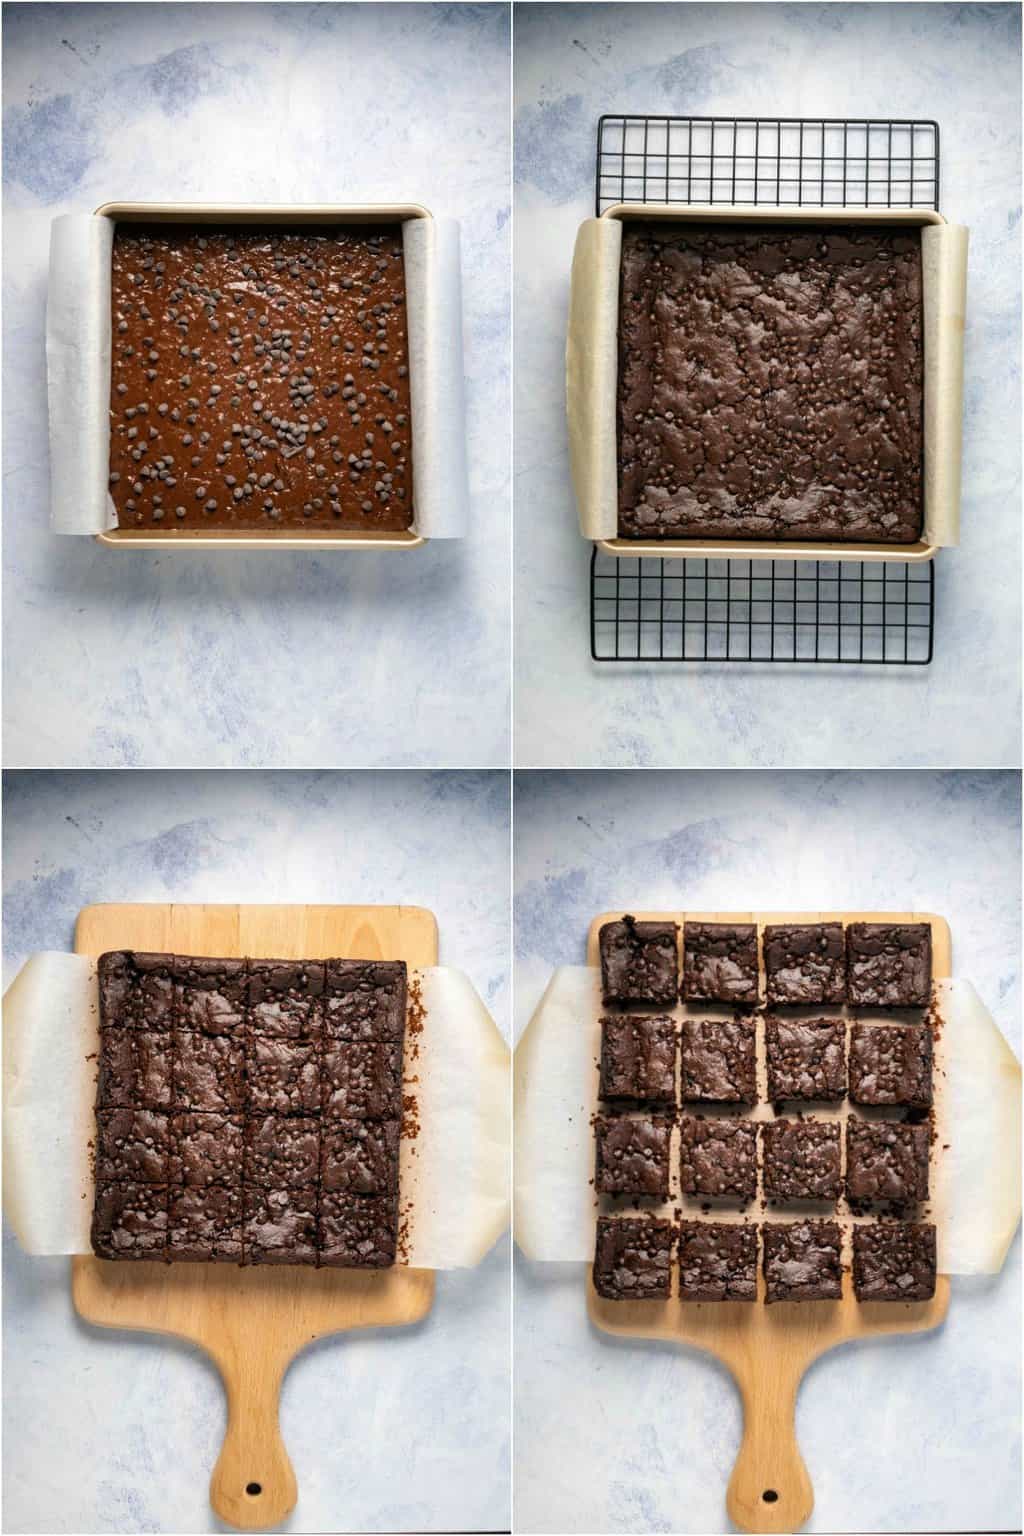 Step by step process photo collage of making black bean brownies. 